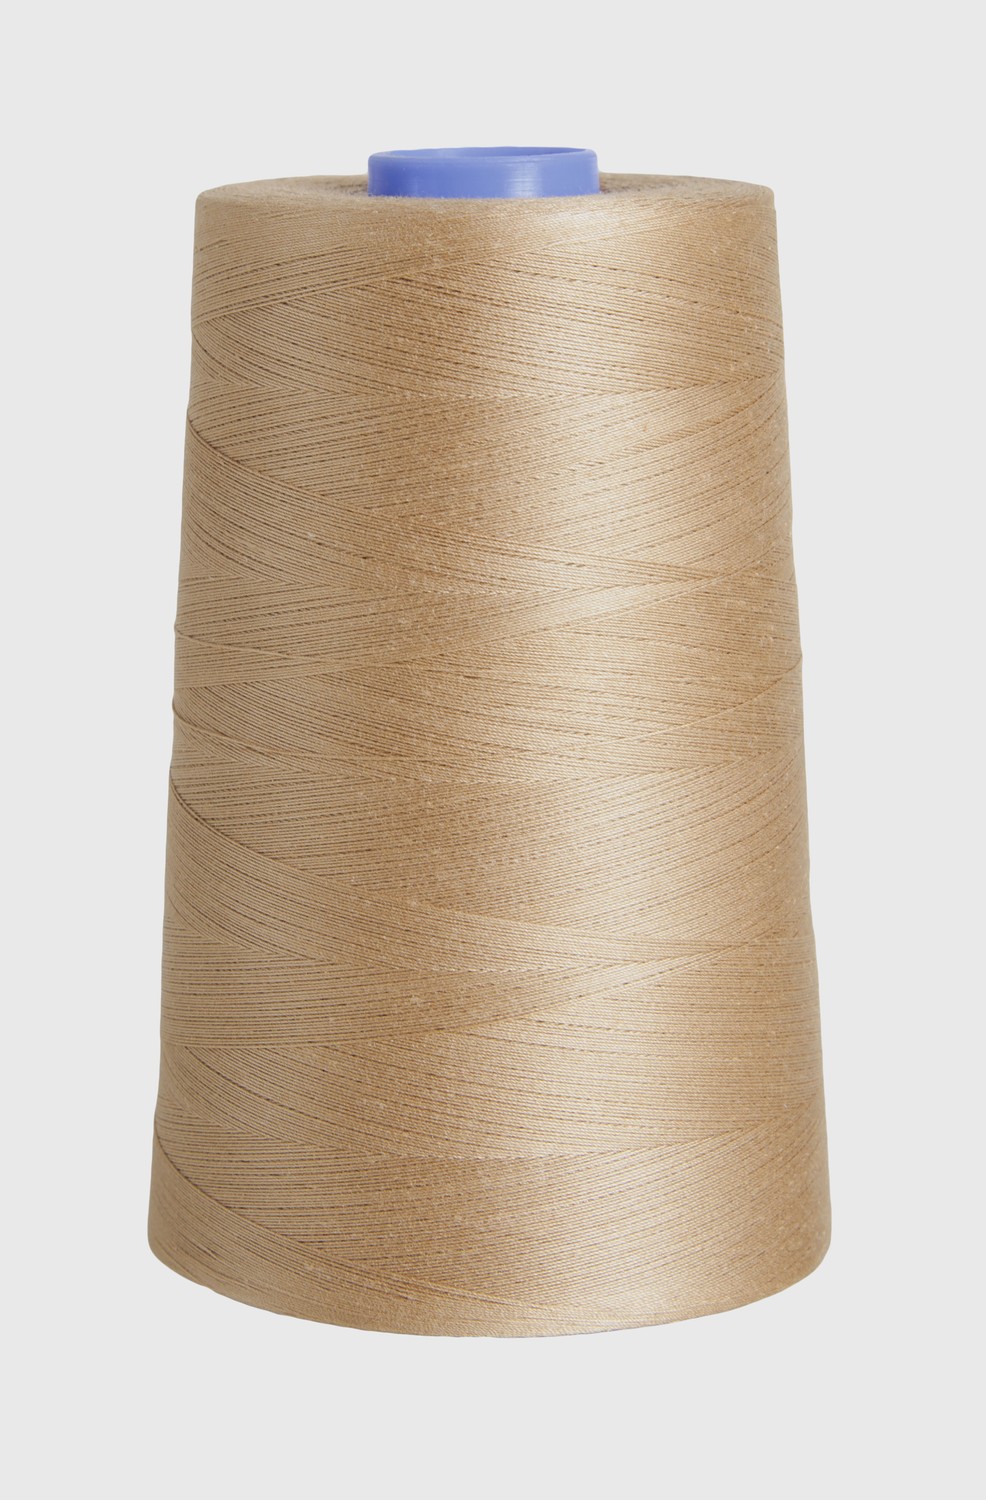  Connecting Threads 100% Cotton Thread - 1200 Yard Spool (Brown)  : Everything Else